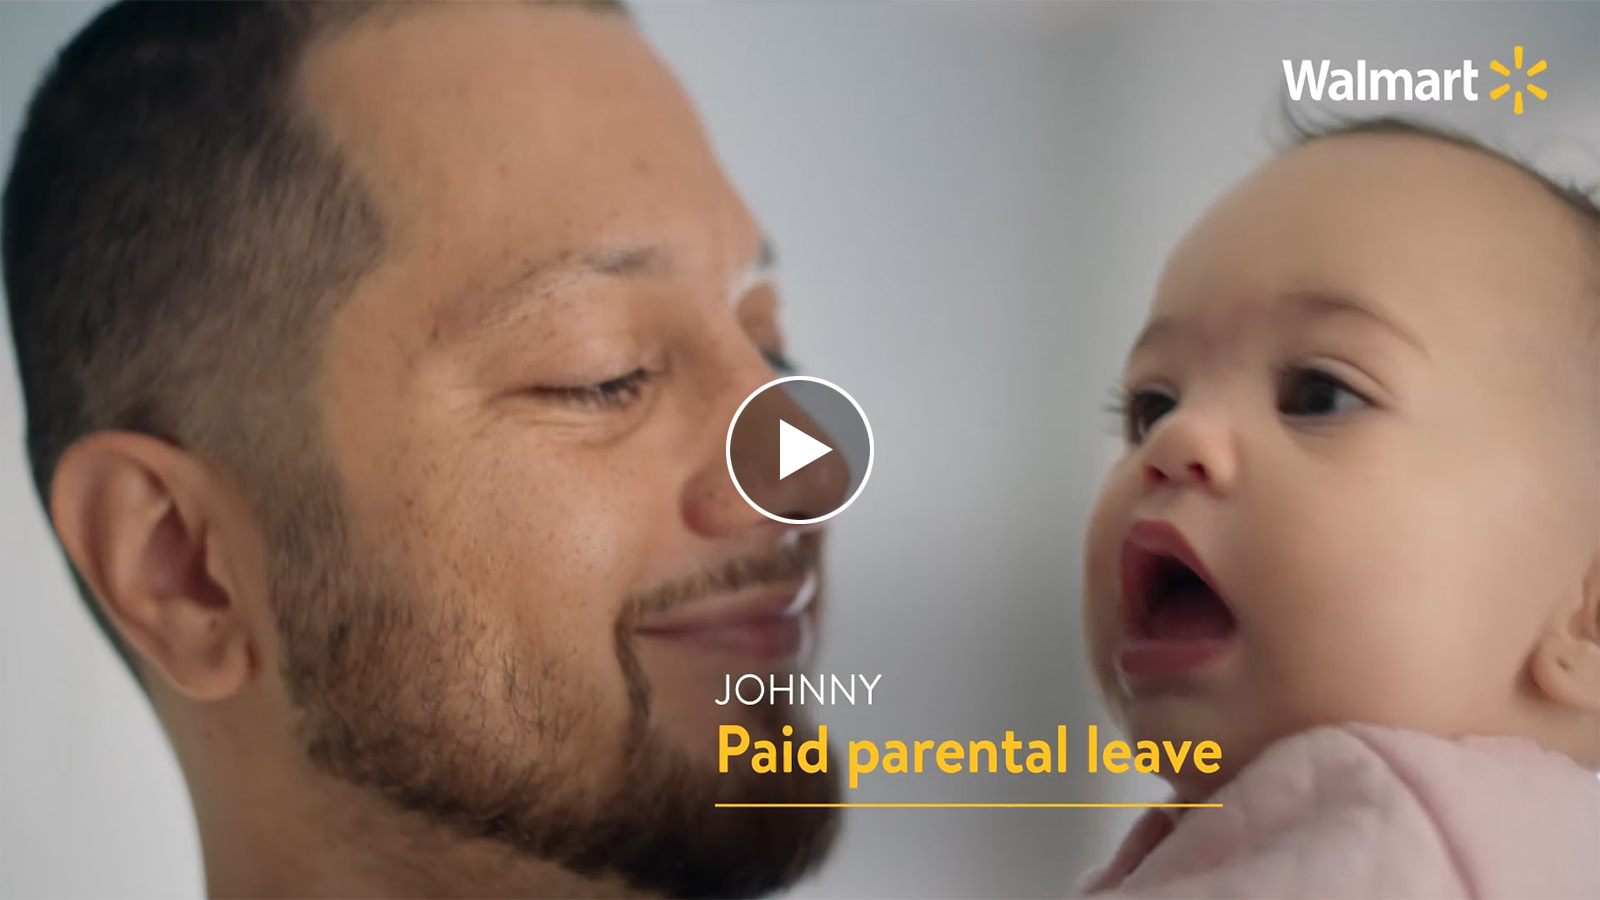 Screen capture with play icon from video. Capture shows man holding baby. Text on screen reads Johnny paid paternal leave.